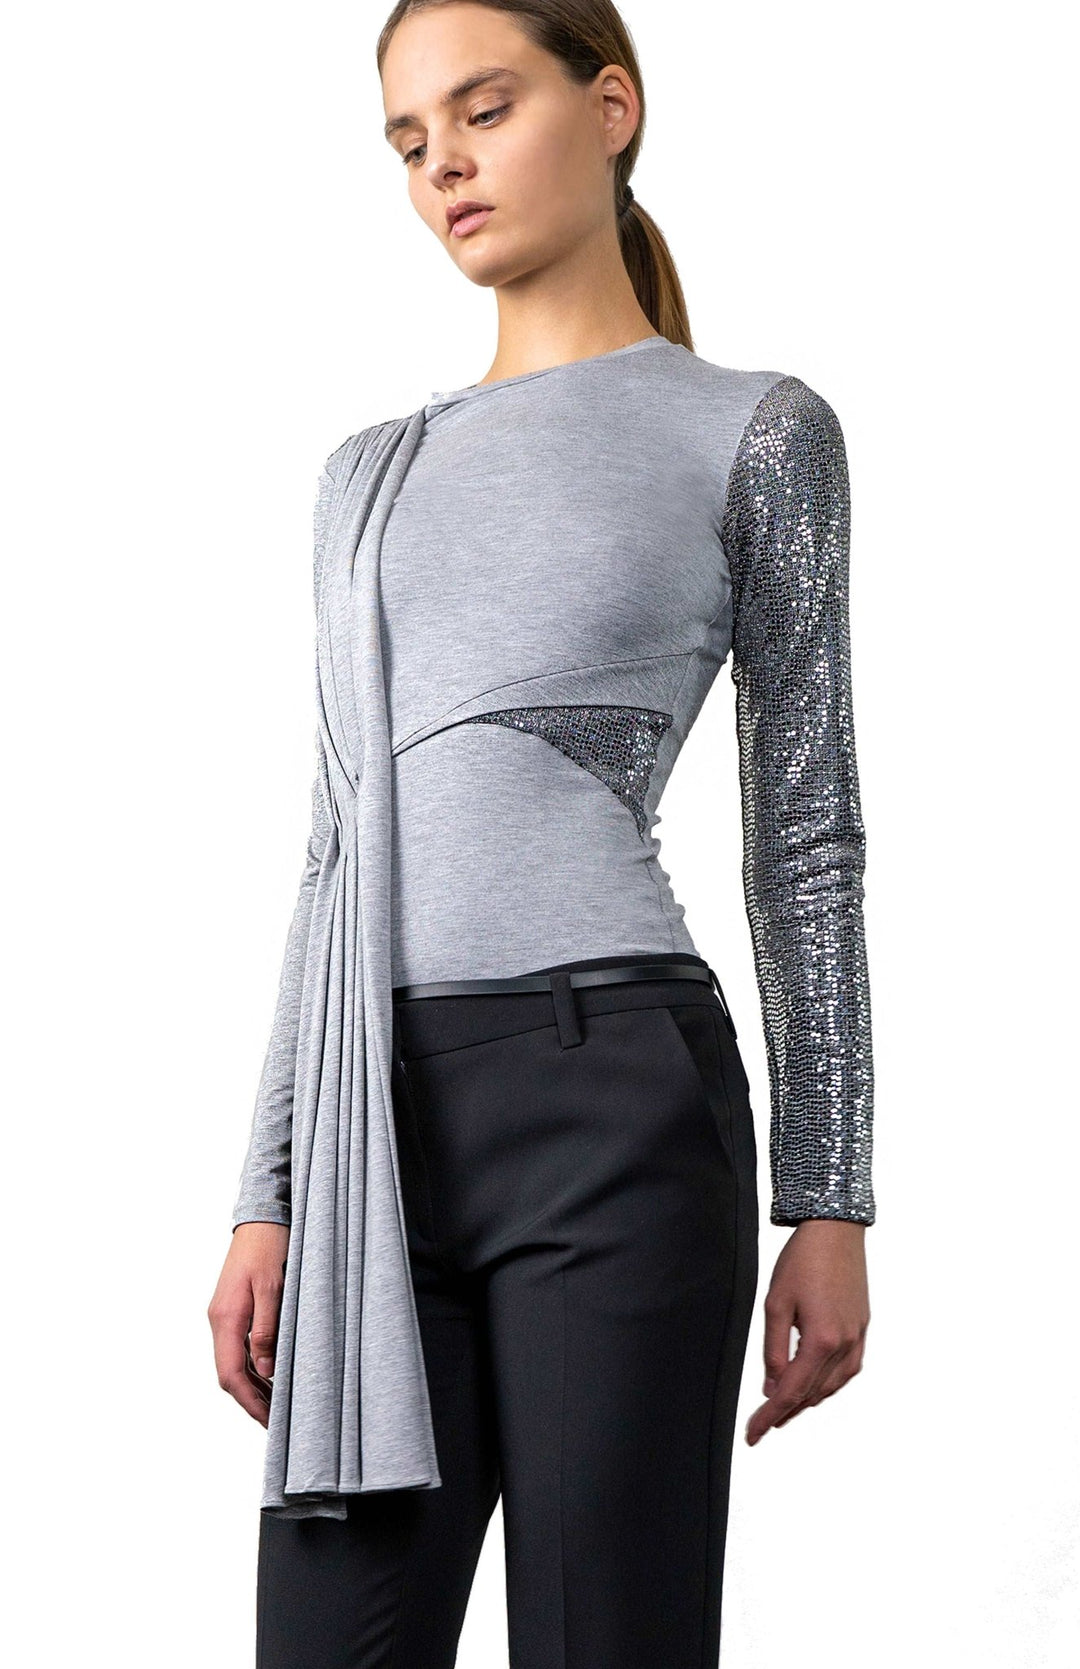 Silver grey, dressy,  long sleeve t shirt with Grecian style draping and sequin contrast detail